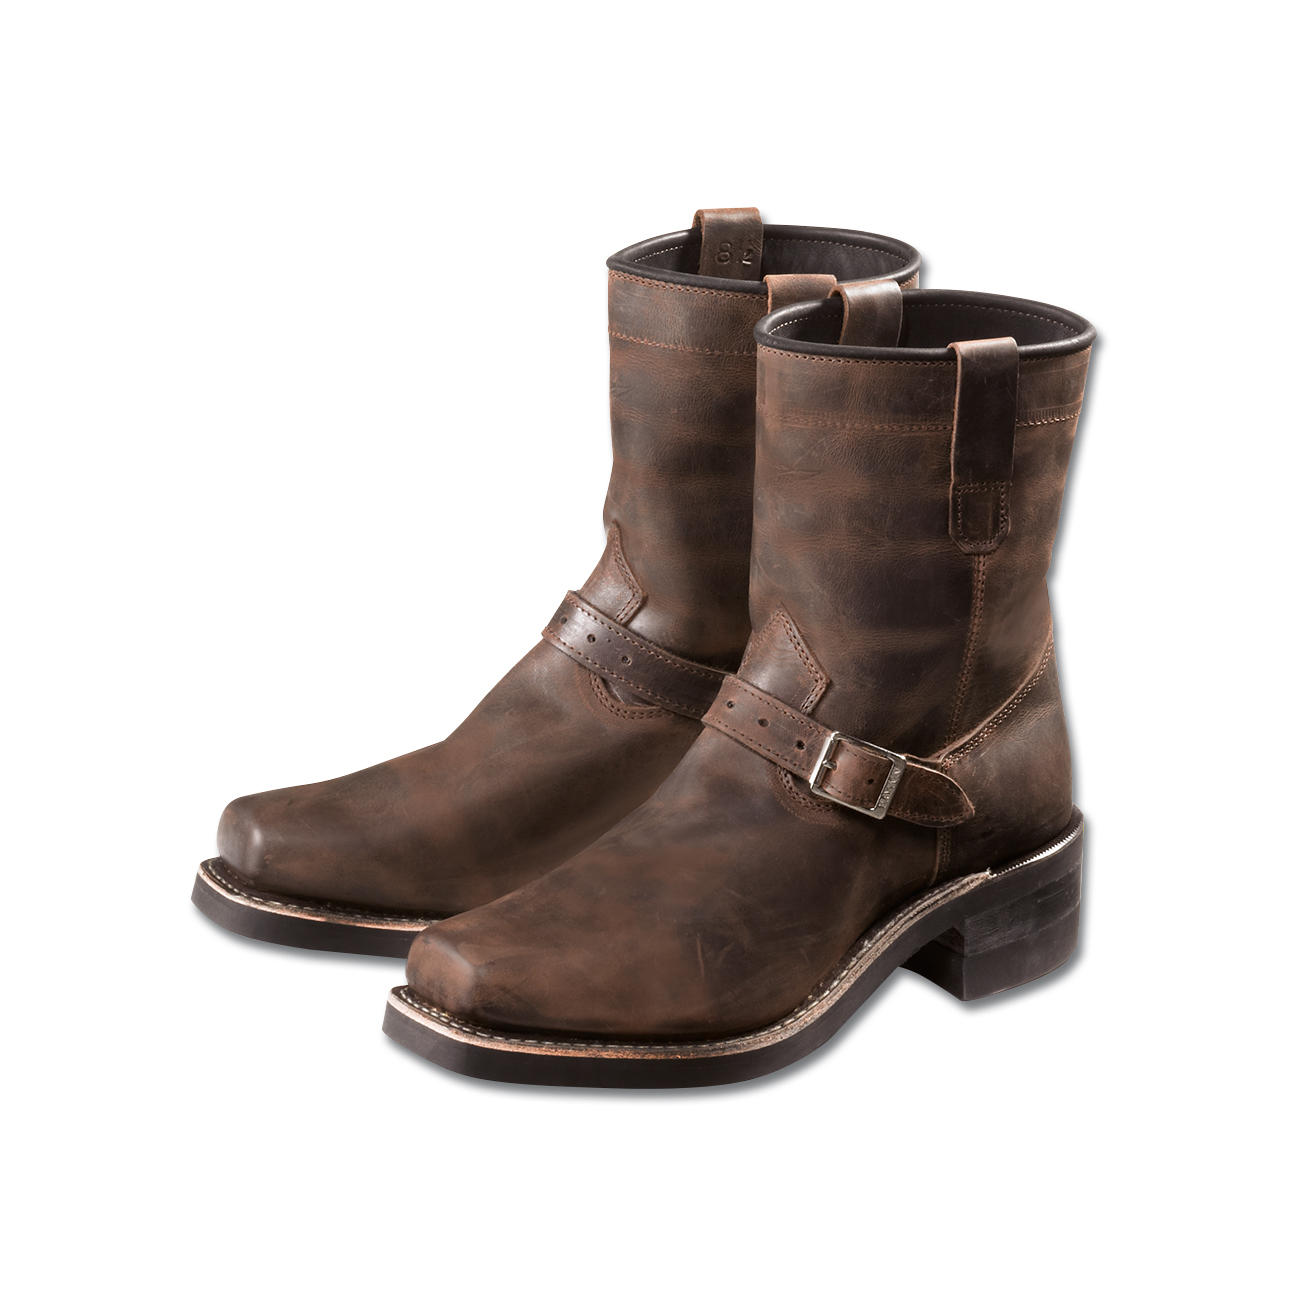 Dayton Boots “Confederate” - At long last – now available in Europe ...